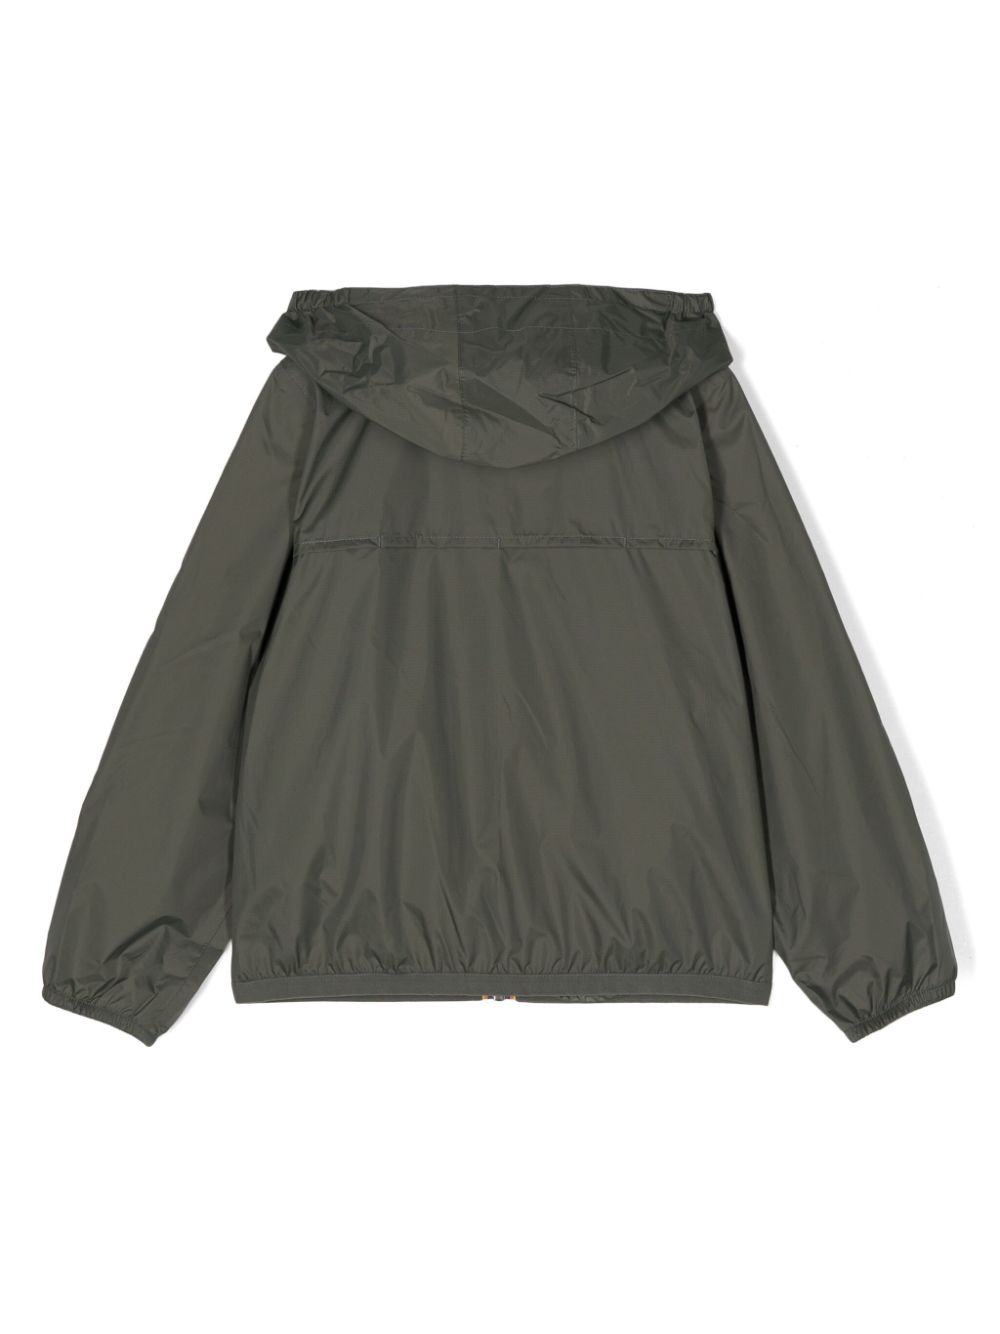 Green jacket for boys with logo